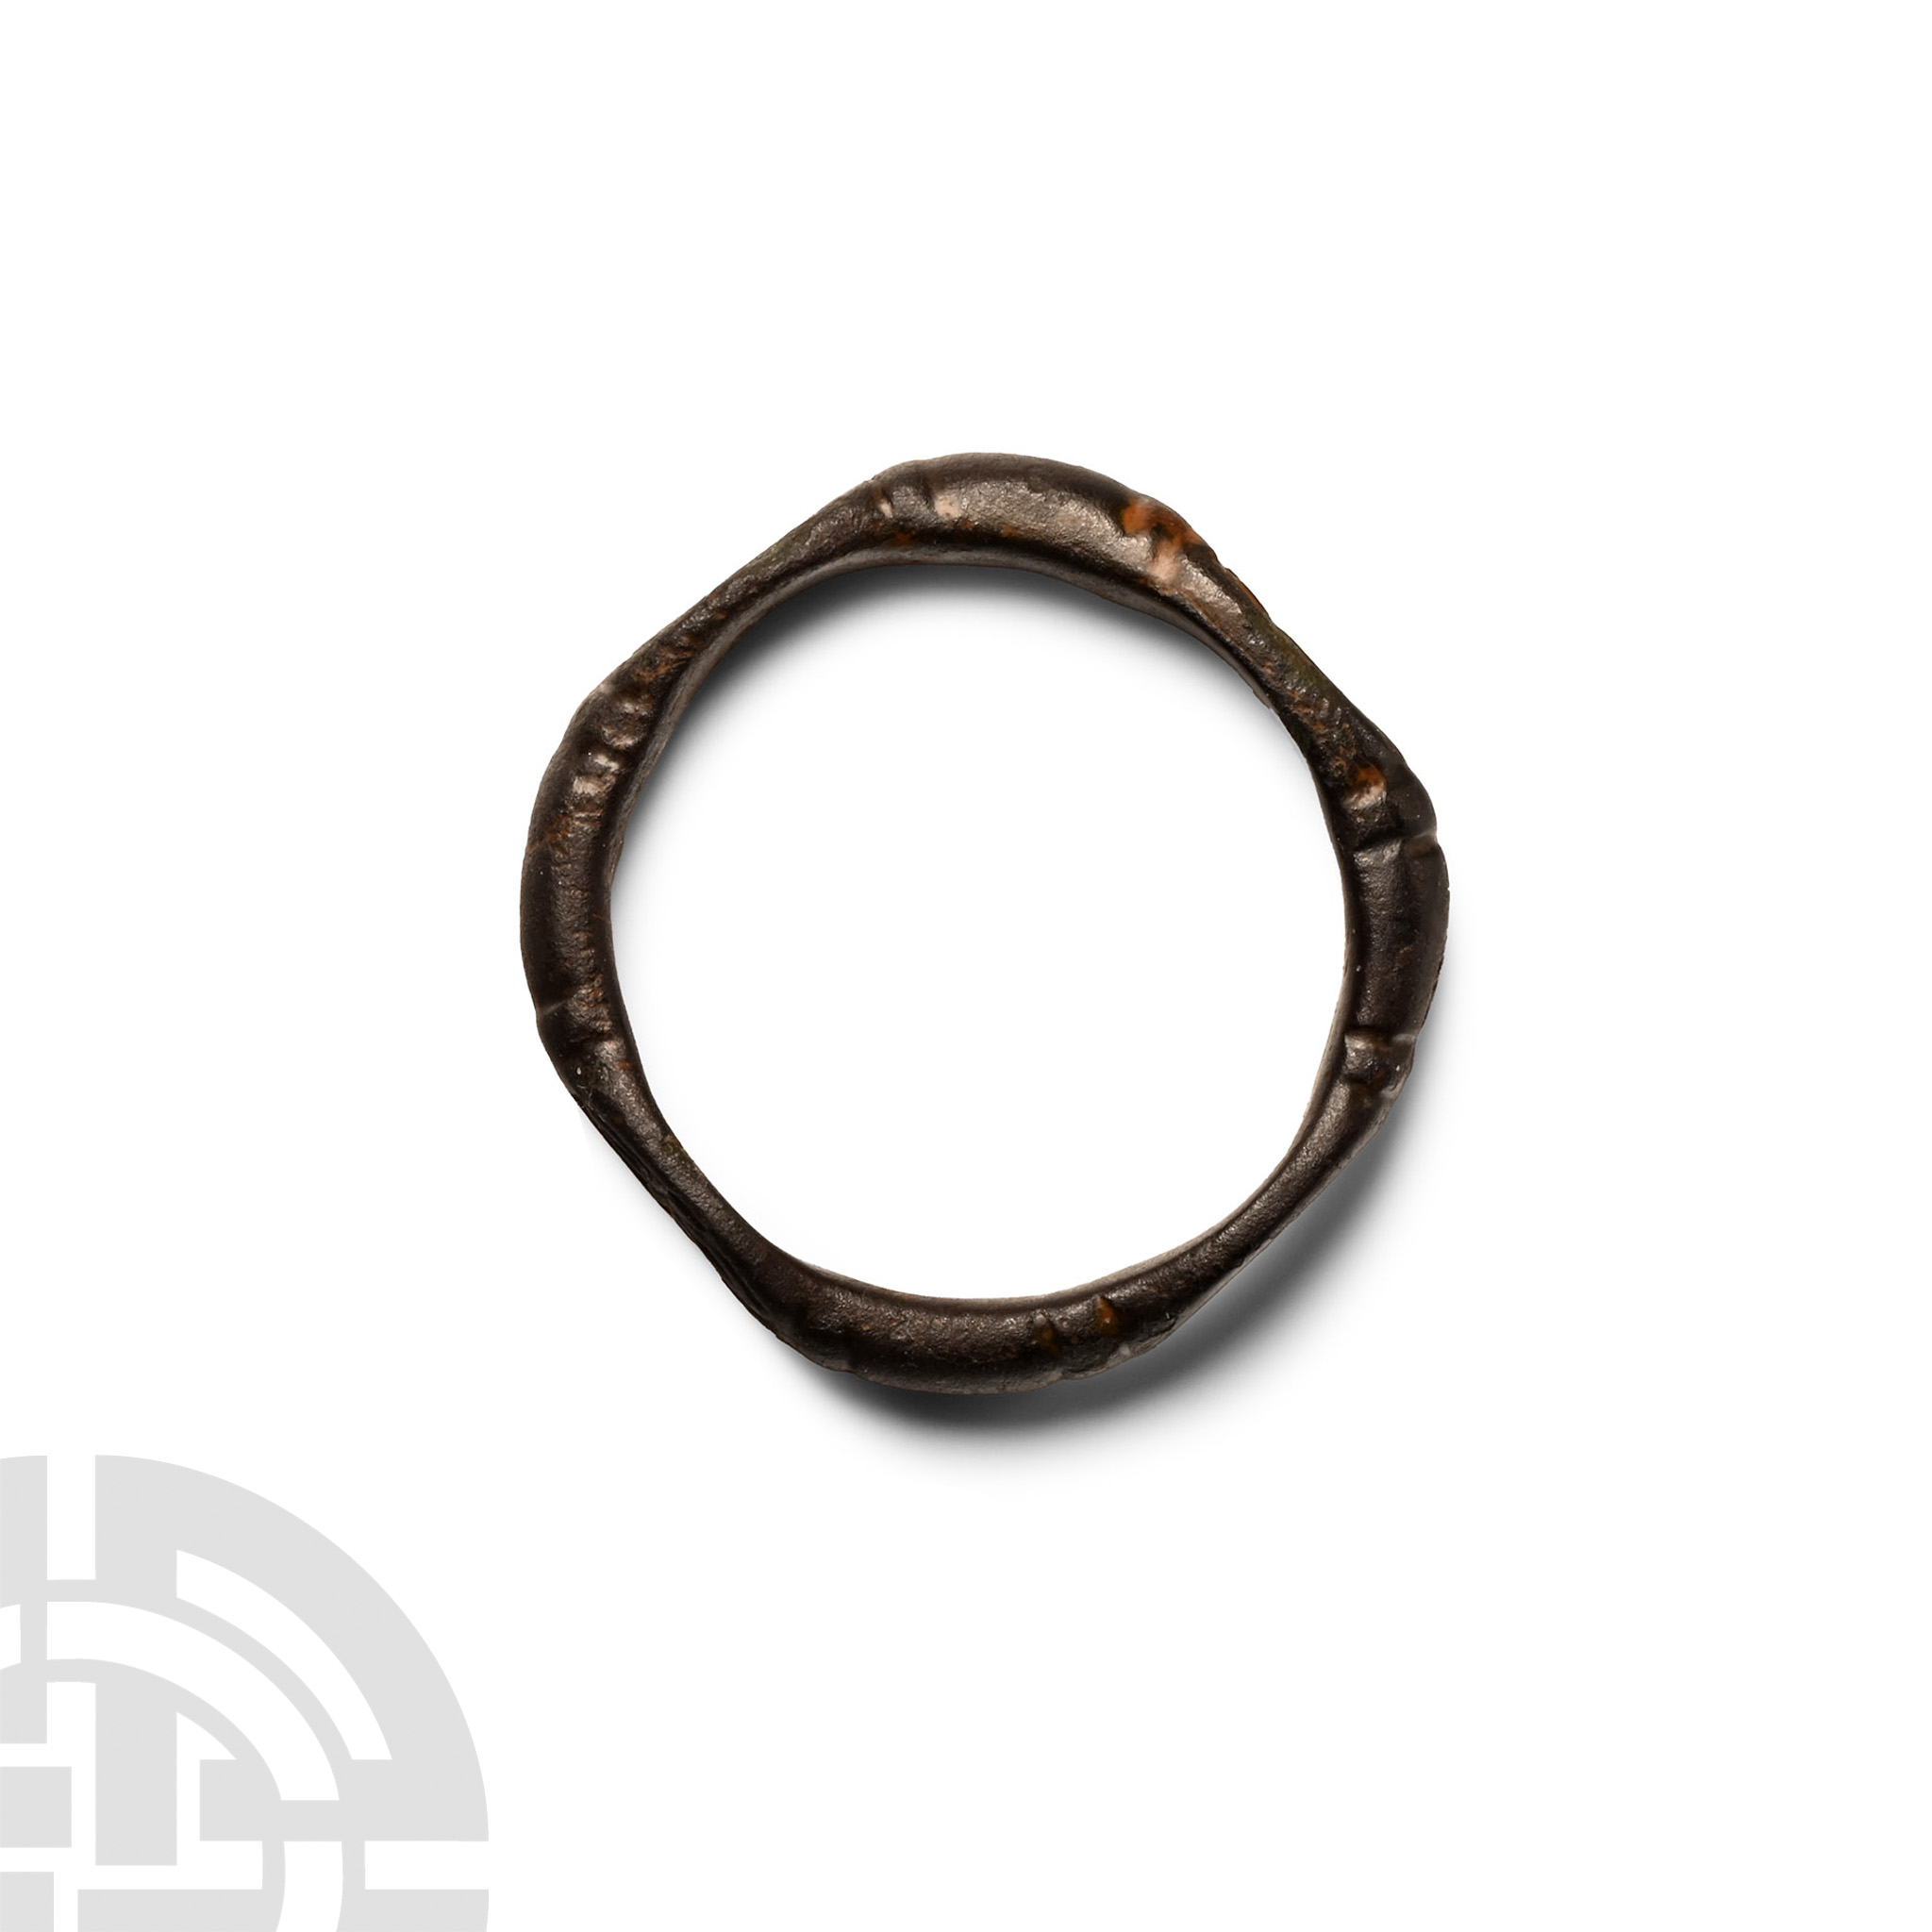 Late Anglo-Saxon Bronze Ring with Four Ovate Bezels - Image 2 of 3